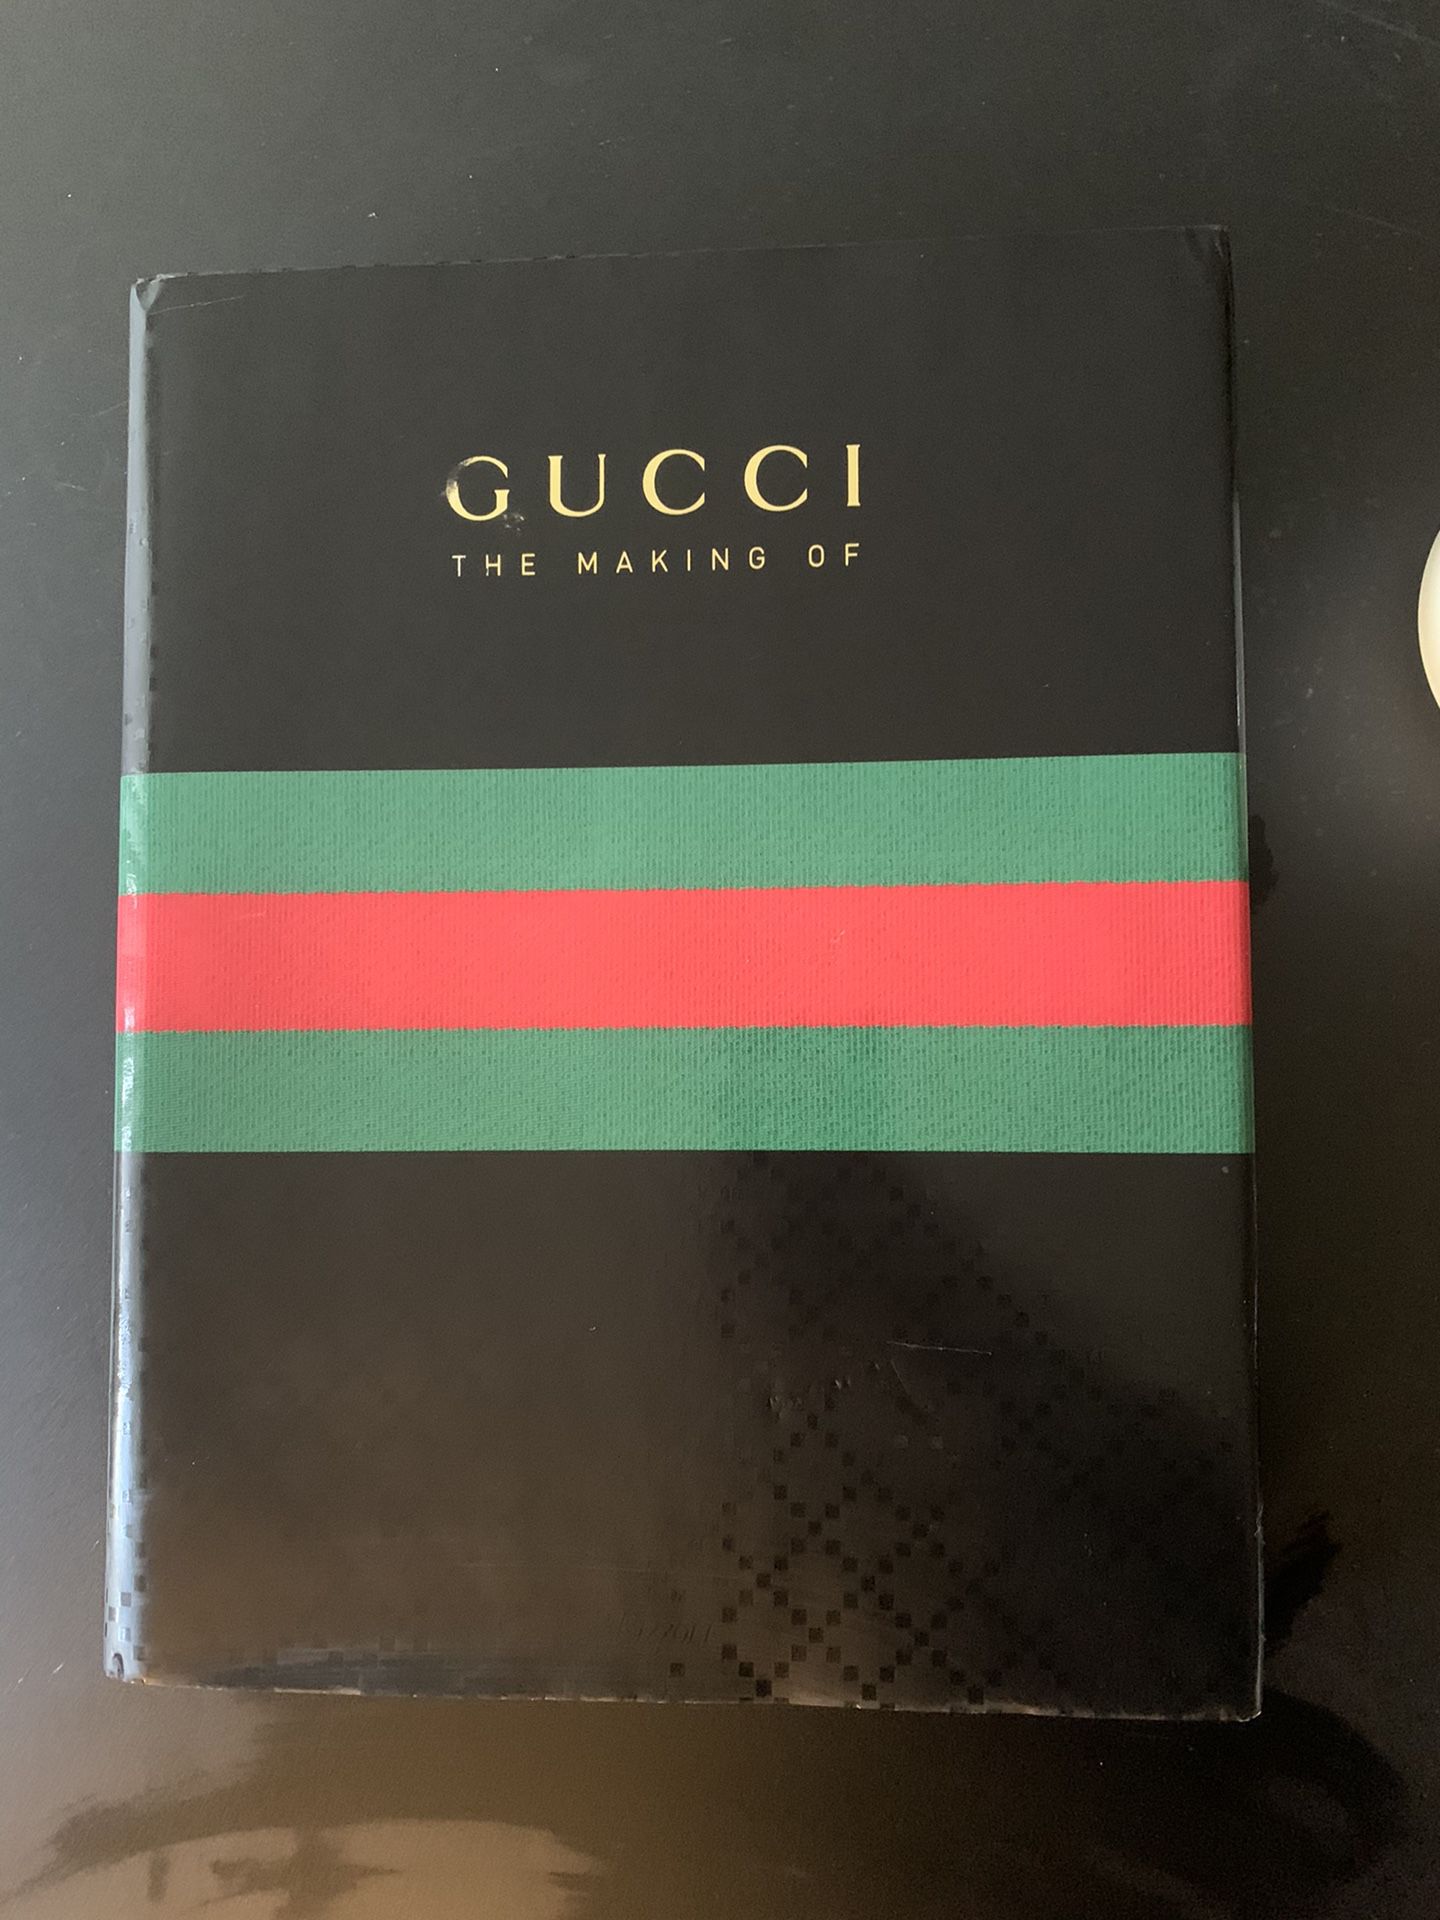 Louis Vuitton Coffee Table Book for Sale in Woodinville, WA - OfferUp